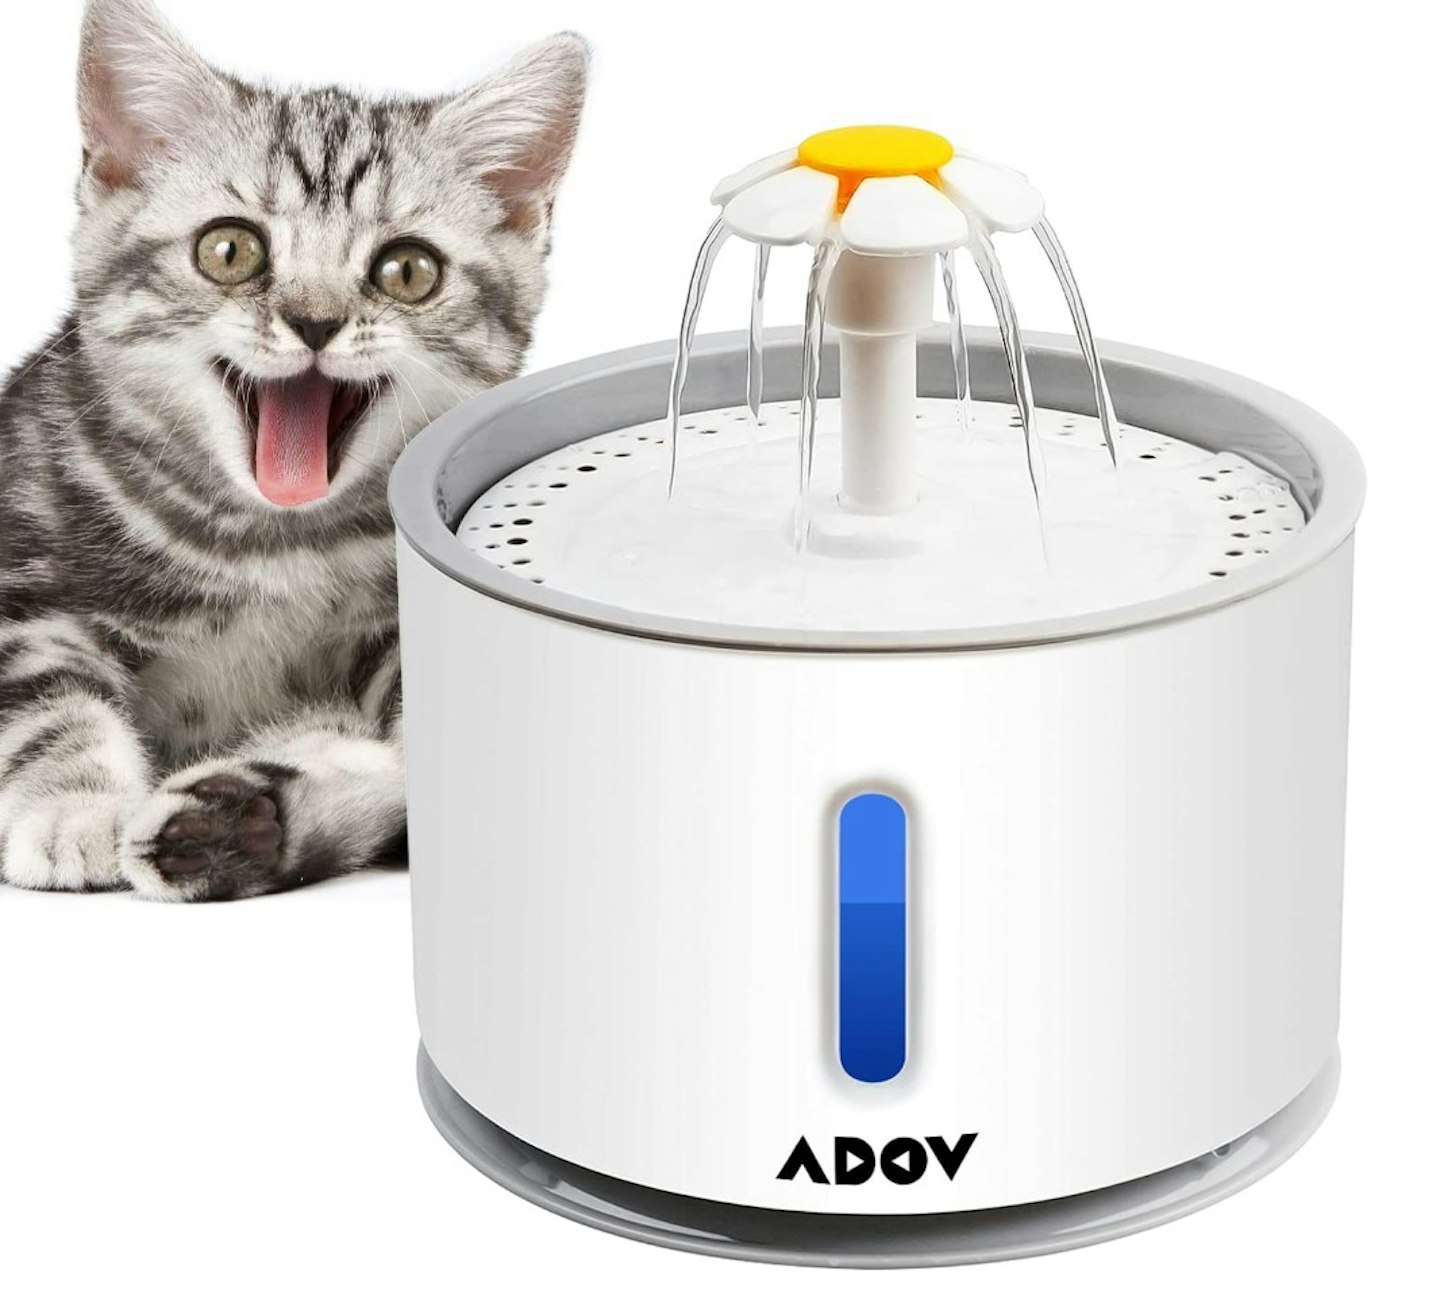  ADOV Cat Water Fountain